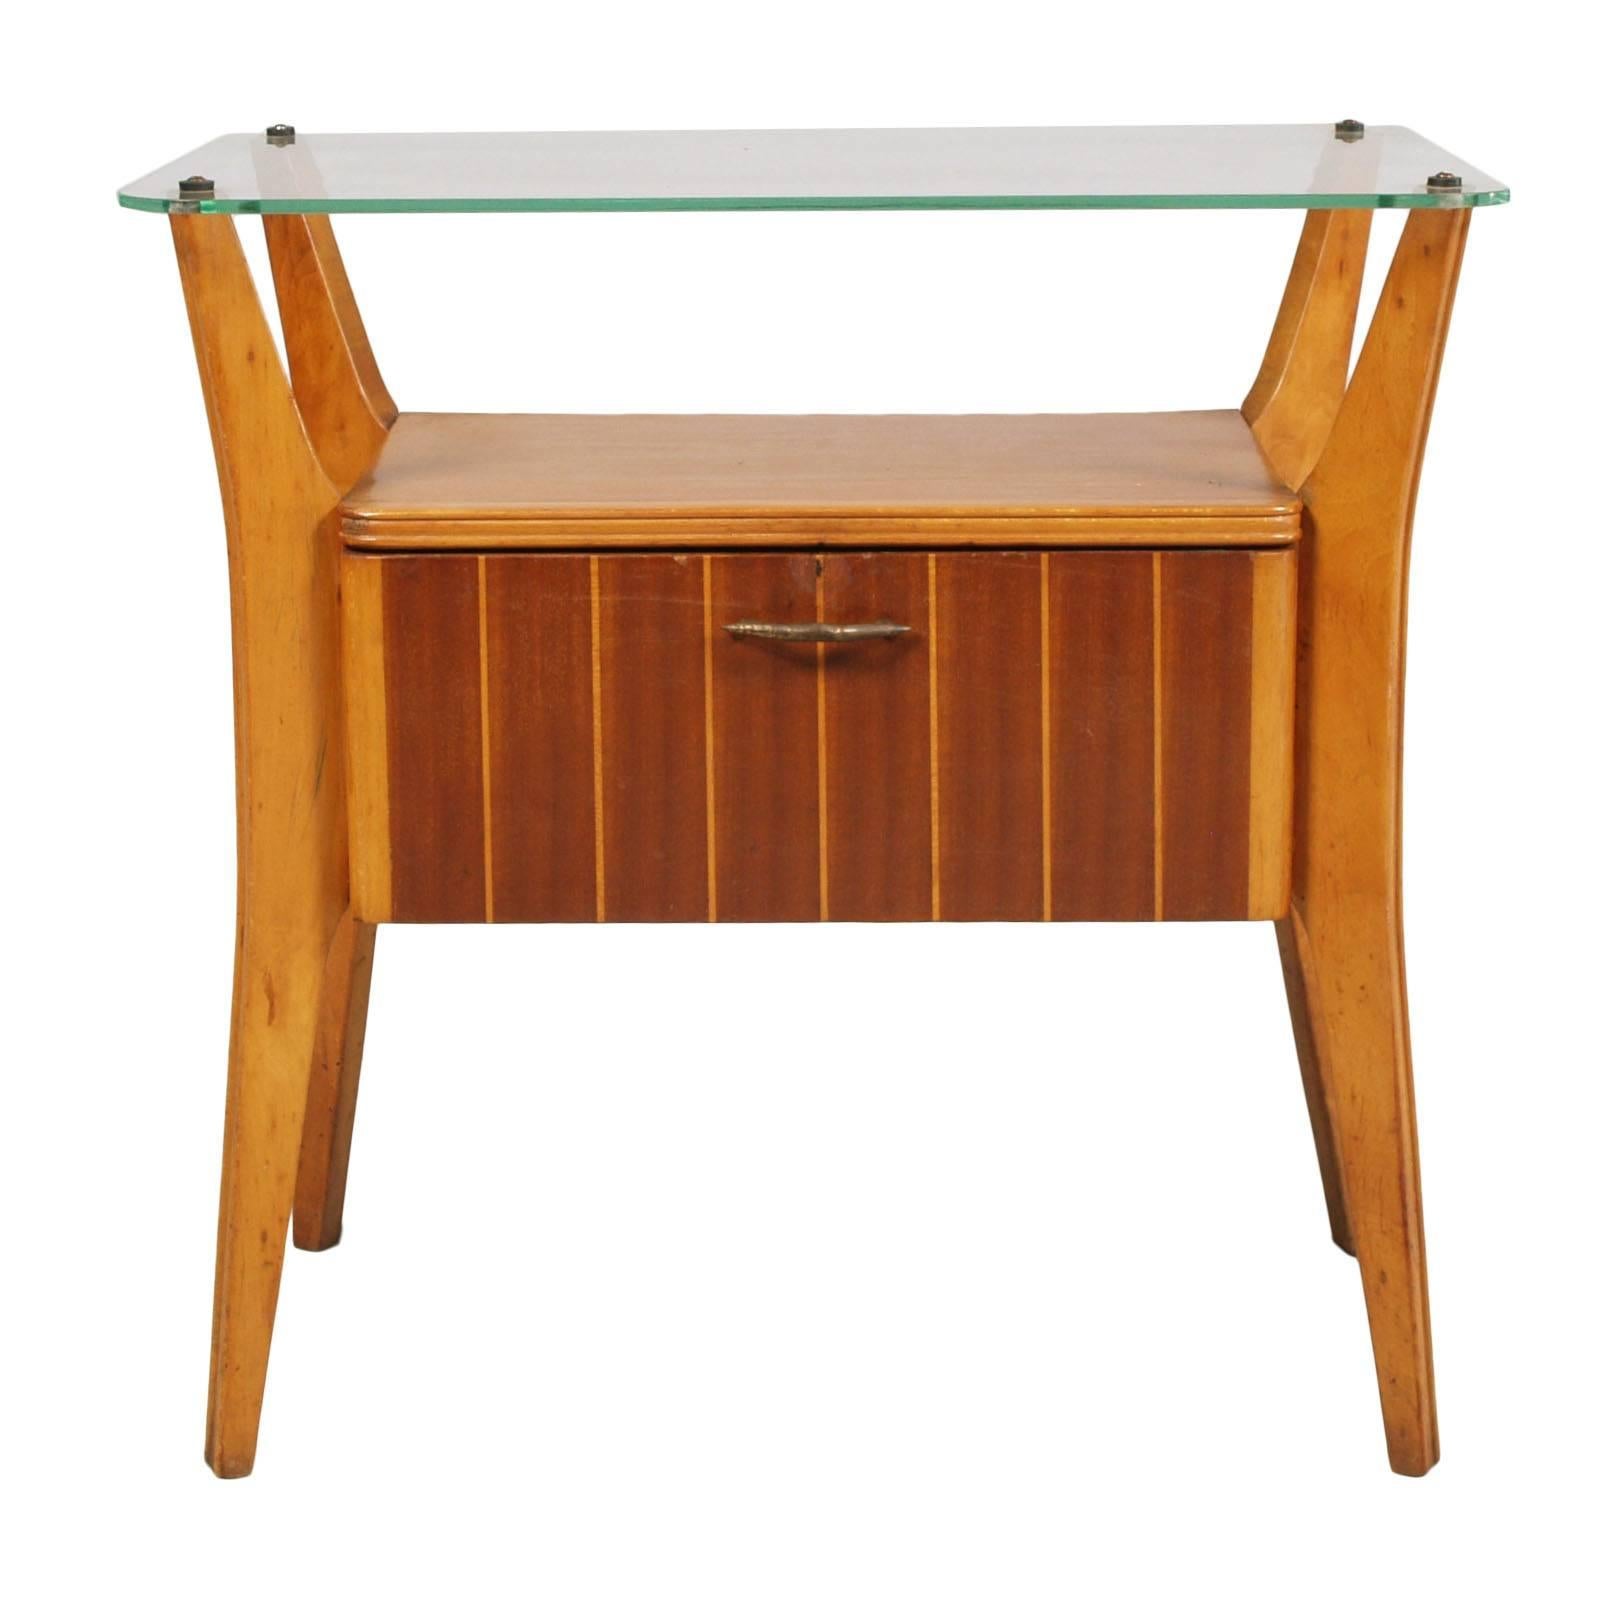 1940s Cantù Nightstand Table Gio Ponti attributable in Walnut, Maple Crystal Top In Good Condition For Sale In Vigonza, Padua